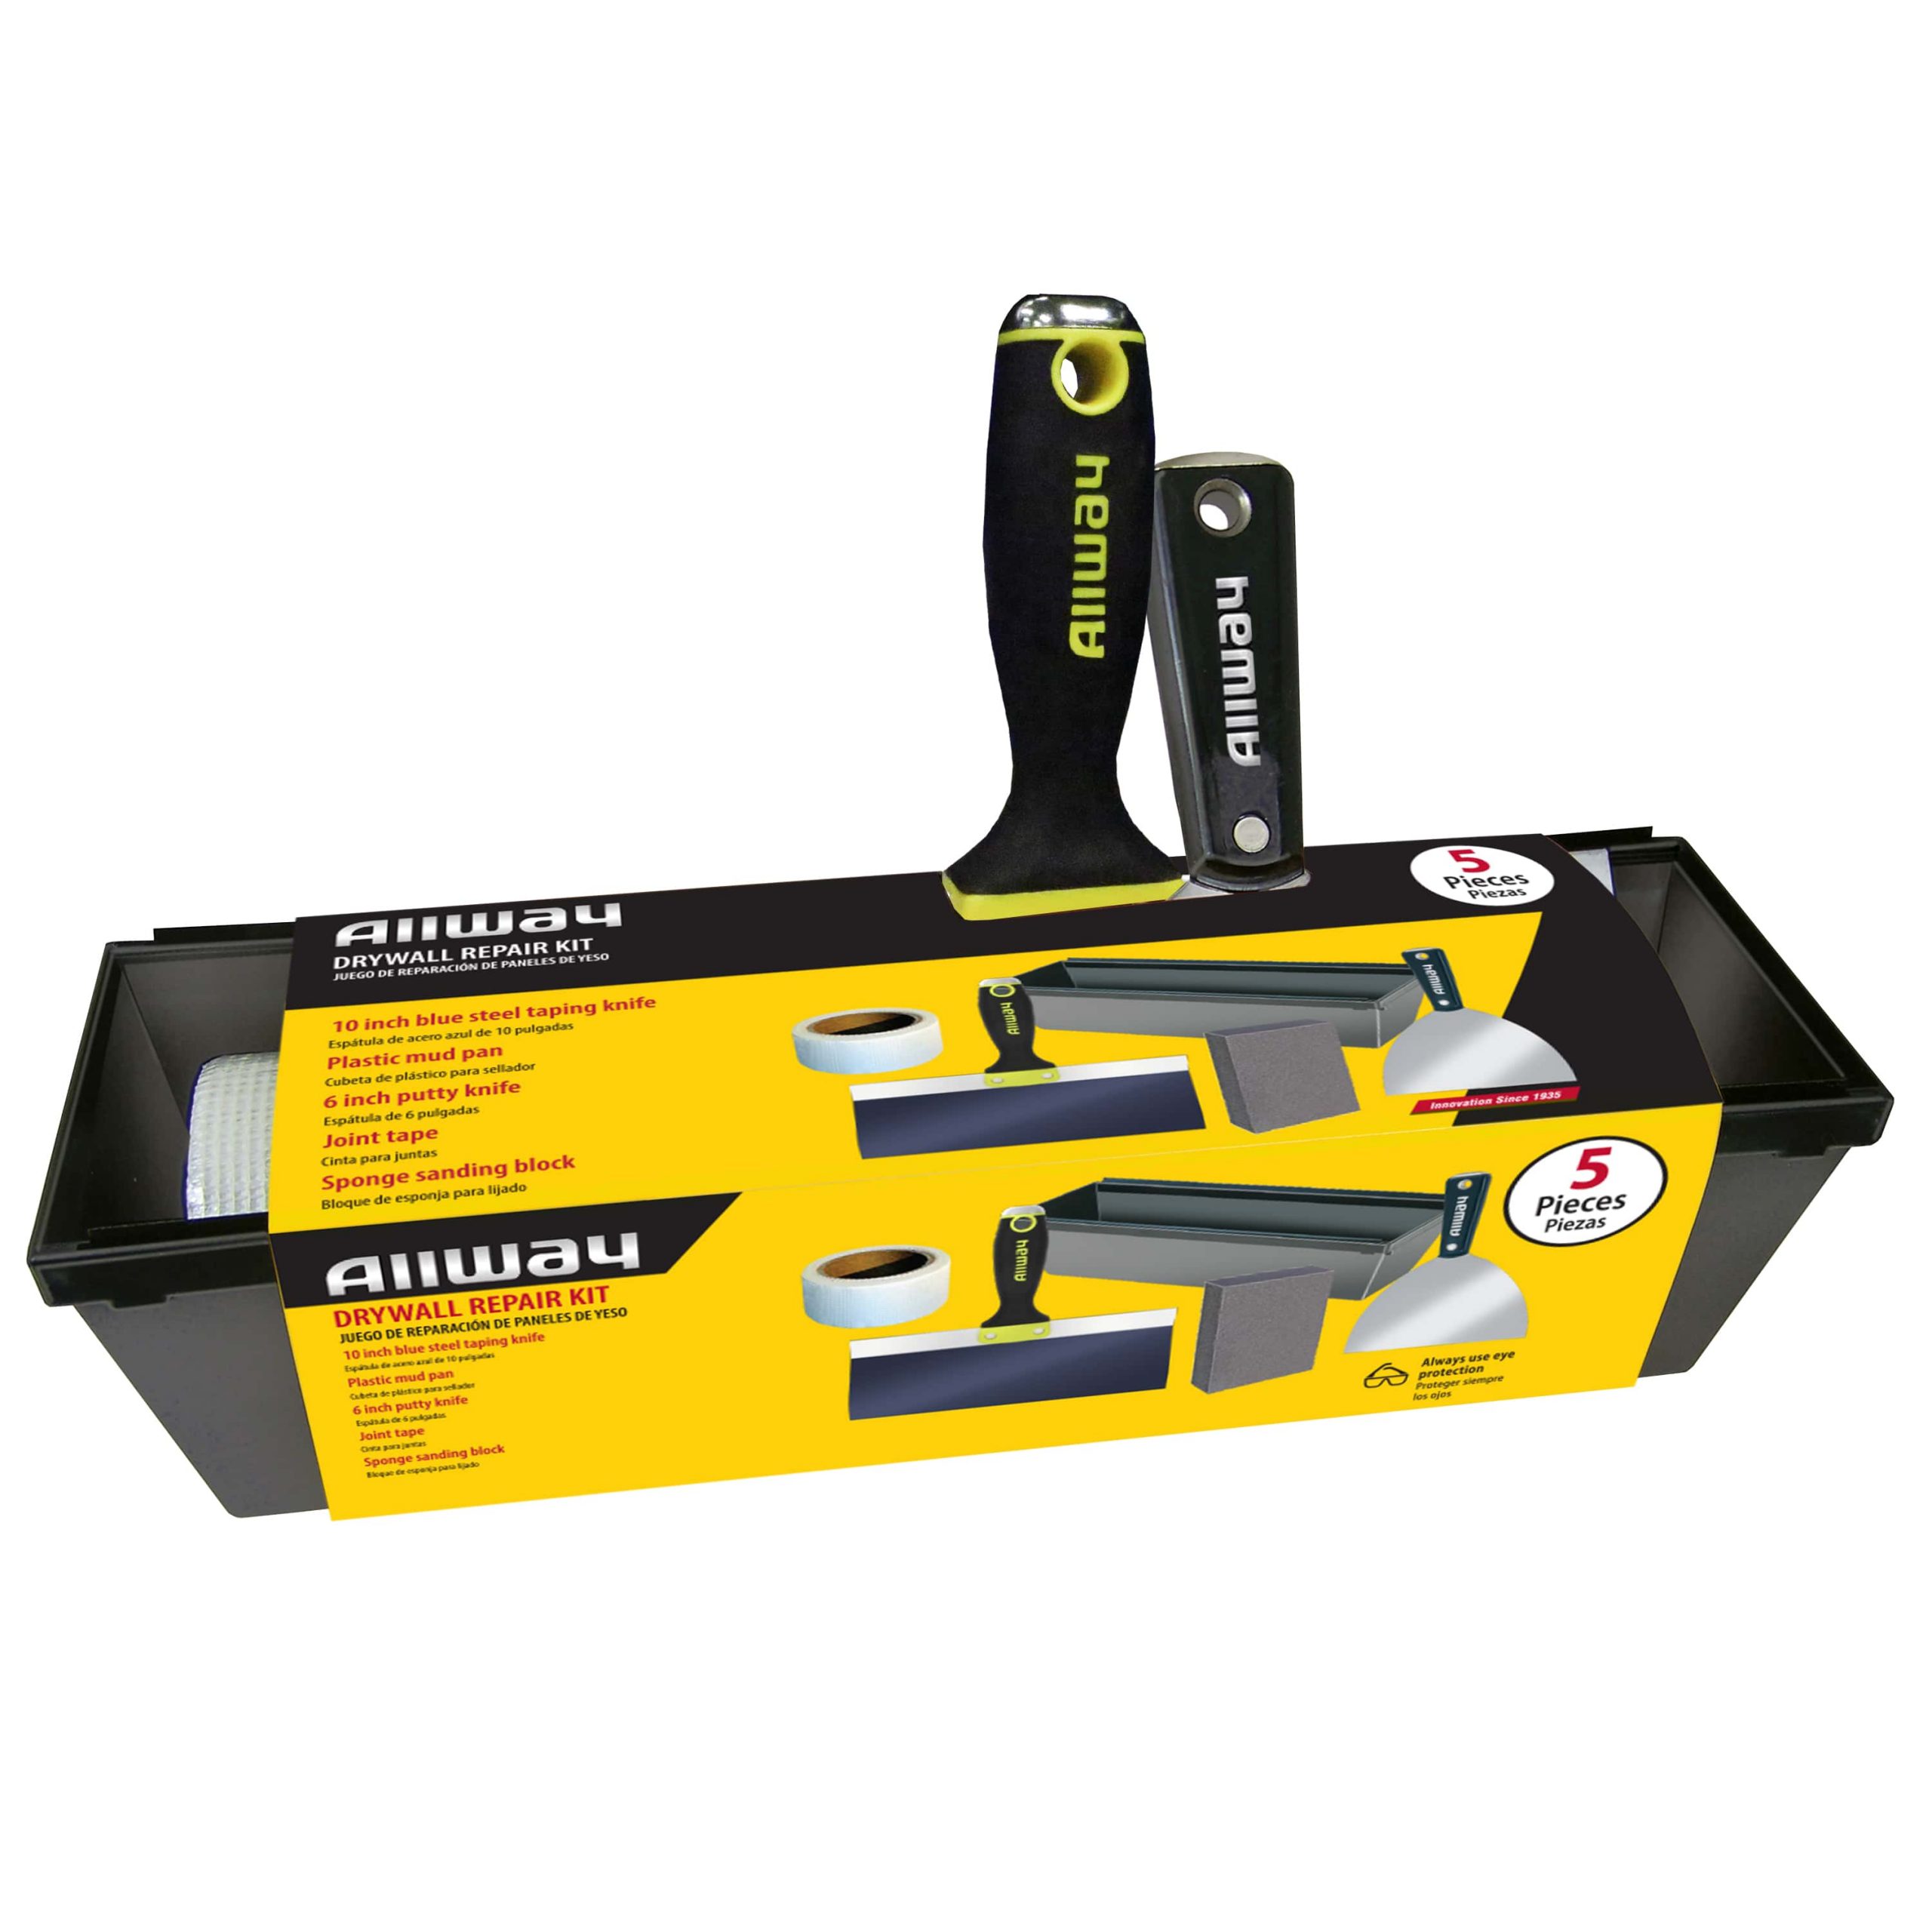 DW5PK) Drywall Repair Kit » ALLWAY® The Tools You Ask For By Name